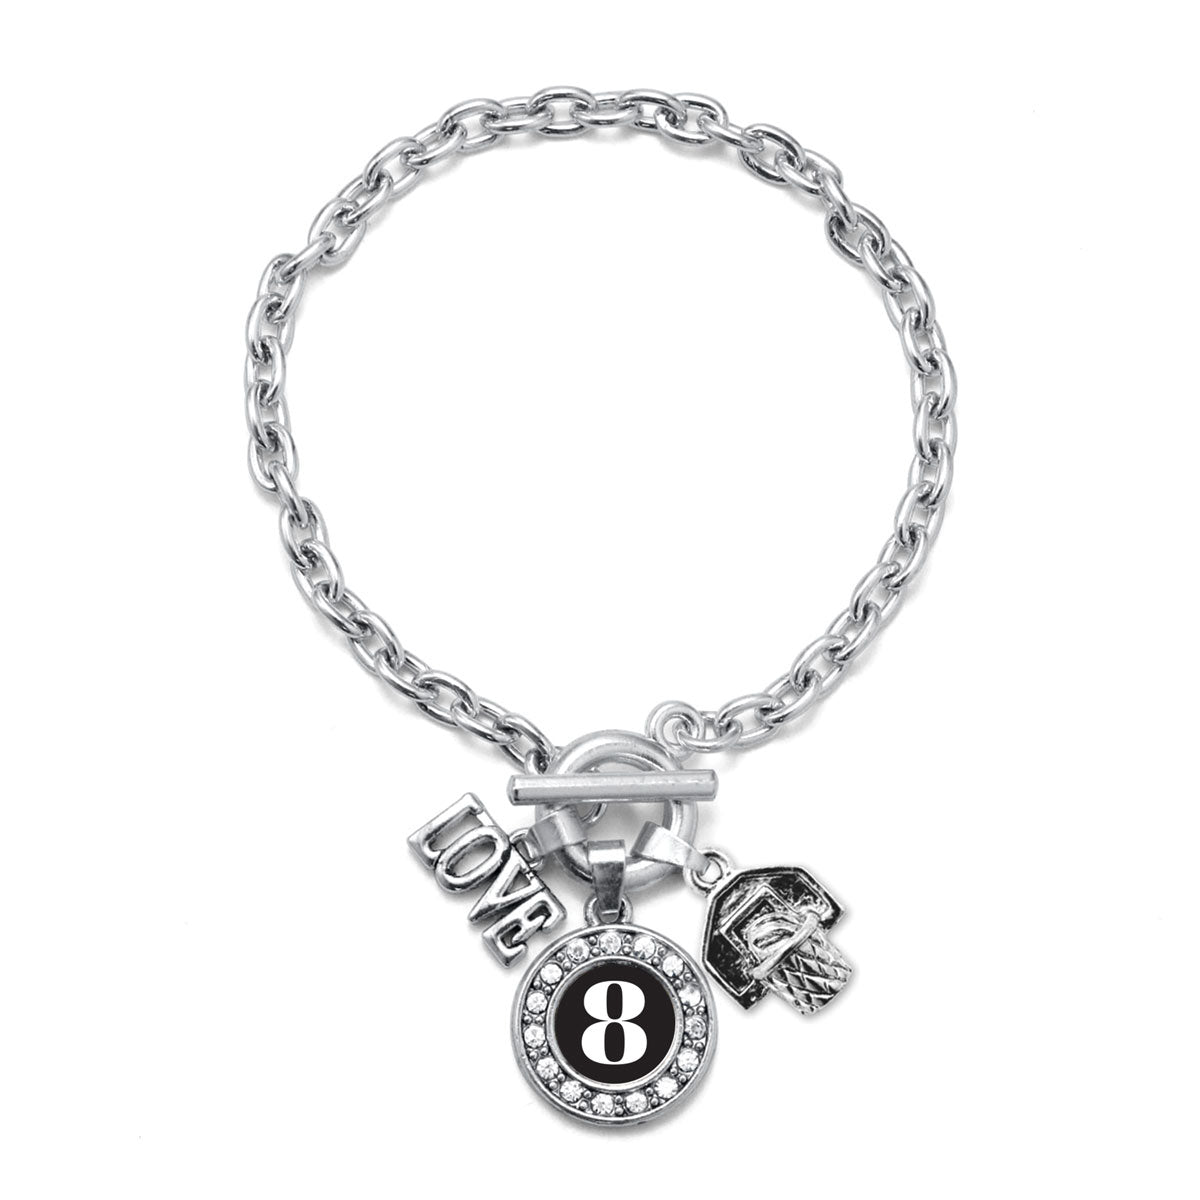 Silver Basketball Hoop - Sports Number 8 Circle Charm Toggle Bracelet